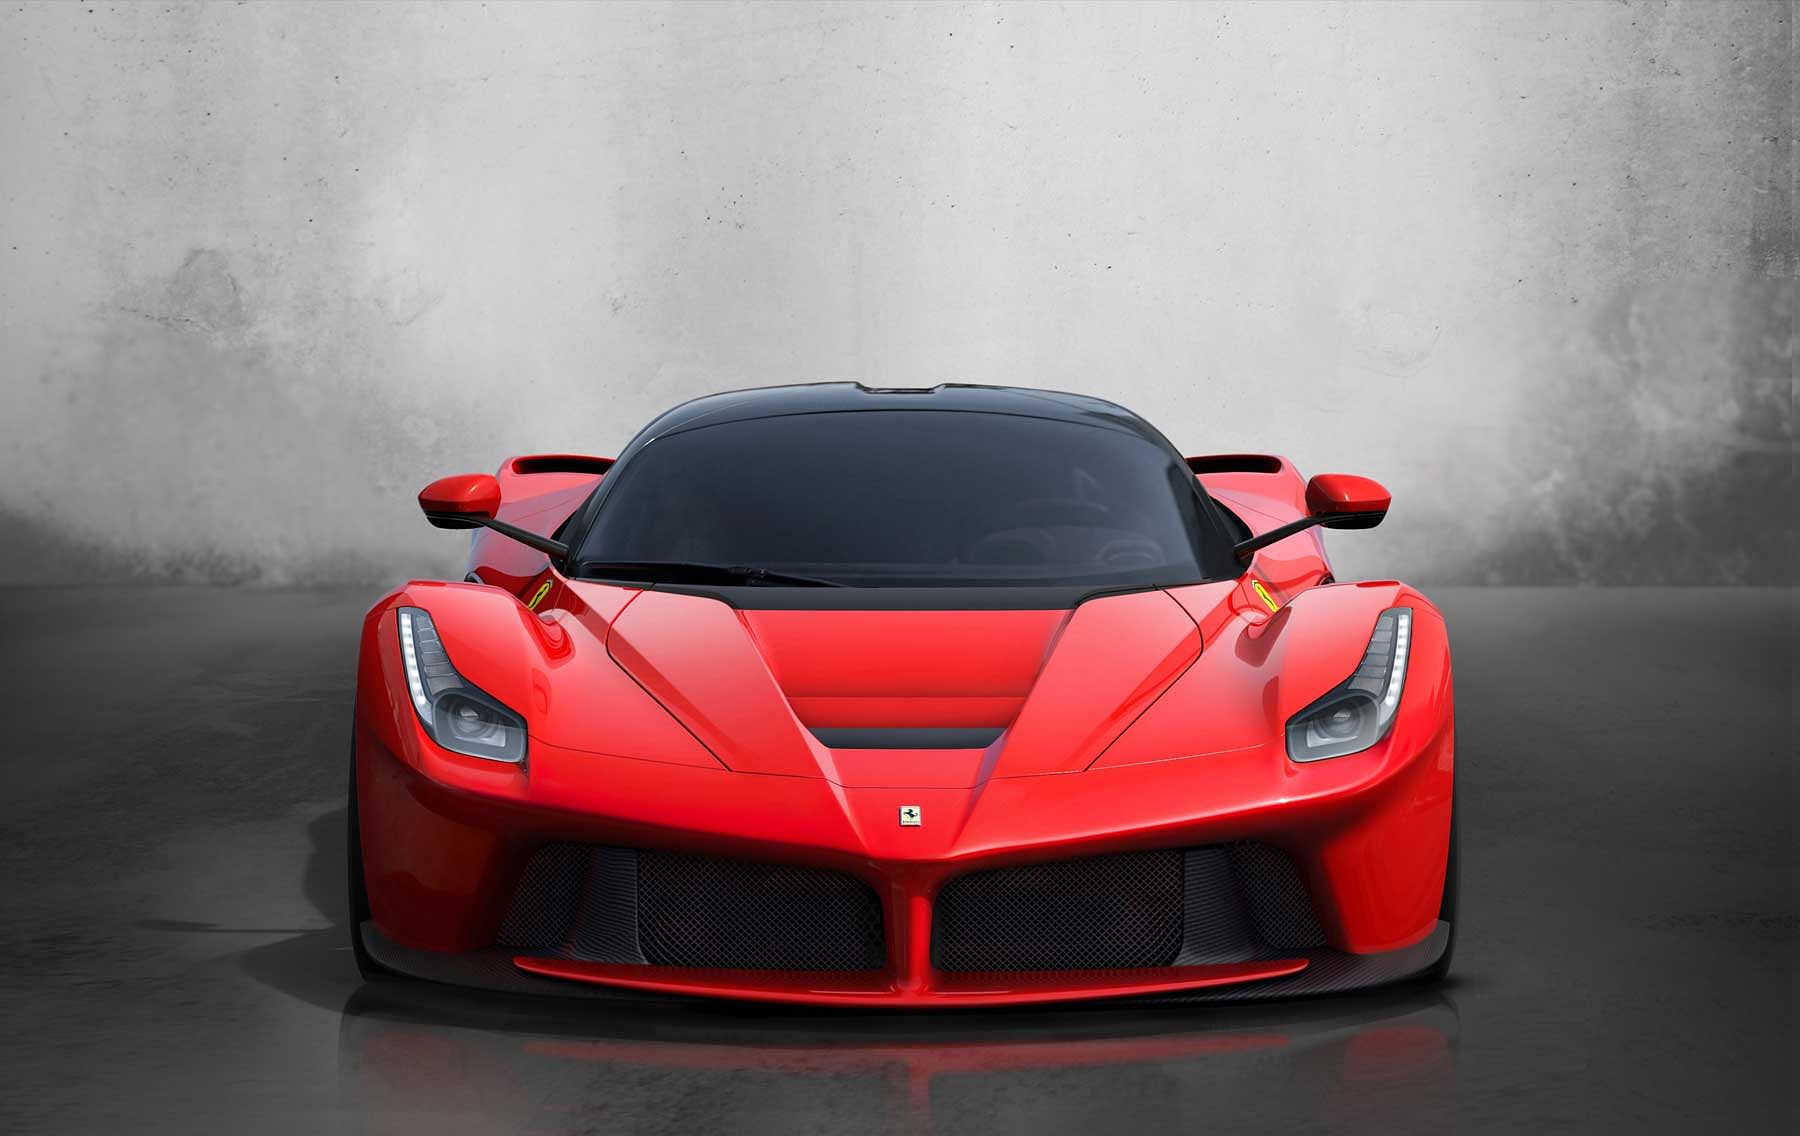 The LaFerrari. If there was ever a car worthy of the high-praise of being called the successor to the F40, this would be it.